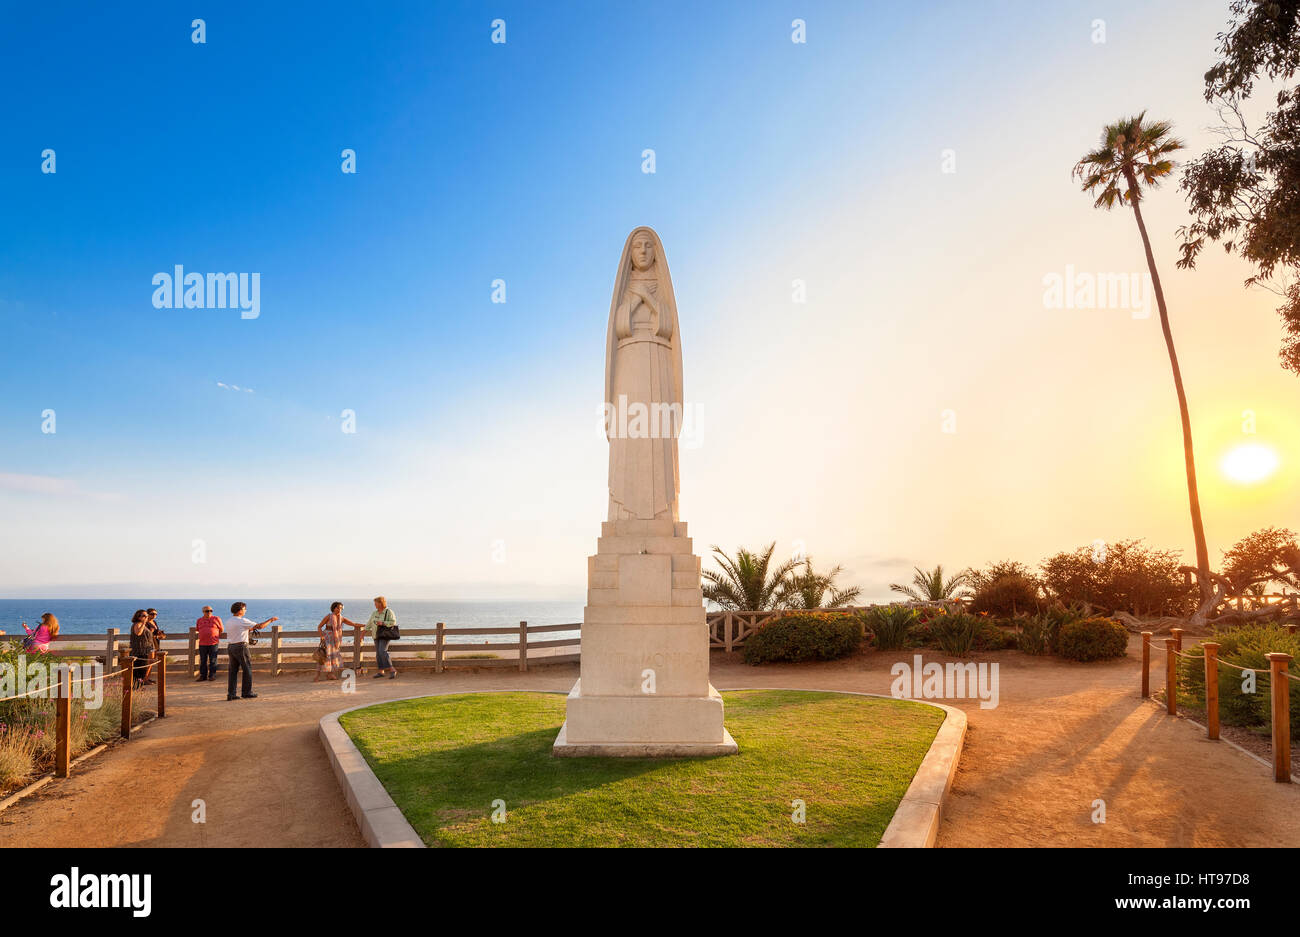 Santa Monica California. Statue of Santa Monica on Ocean Avenue along the beach. At sunset with tourists taking pictures. Stock Photo